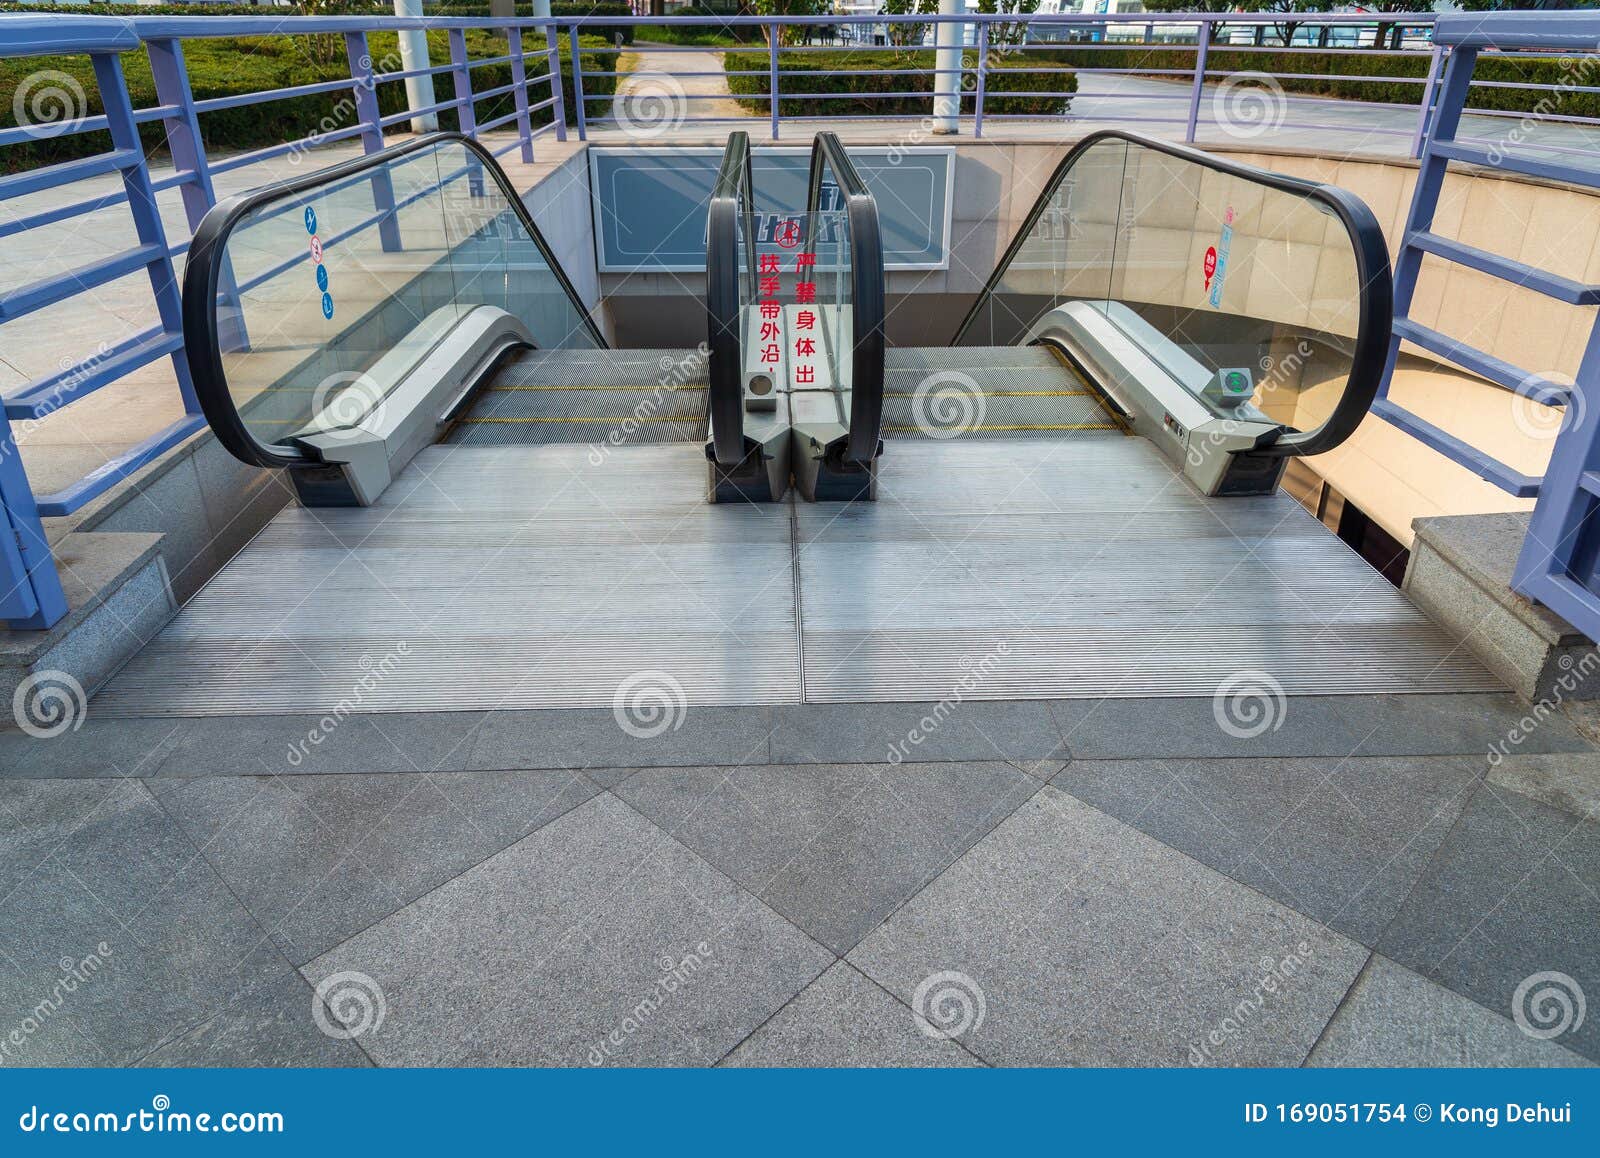 Entrance or Exit of Escalator Stairs Down To Underground Building Stock ...